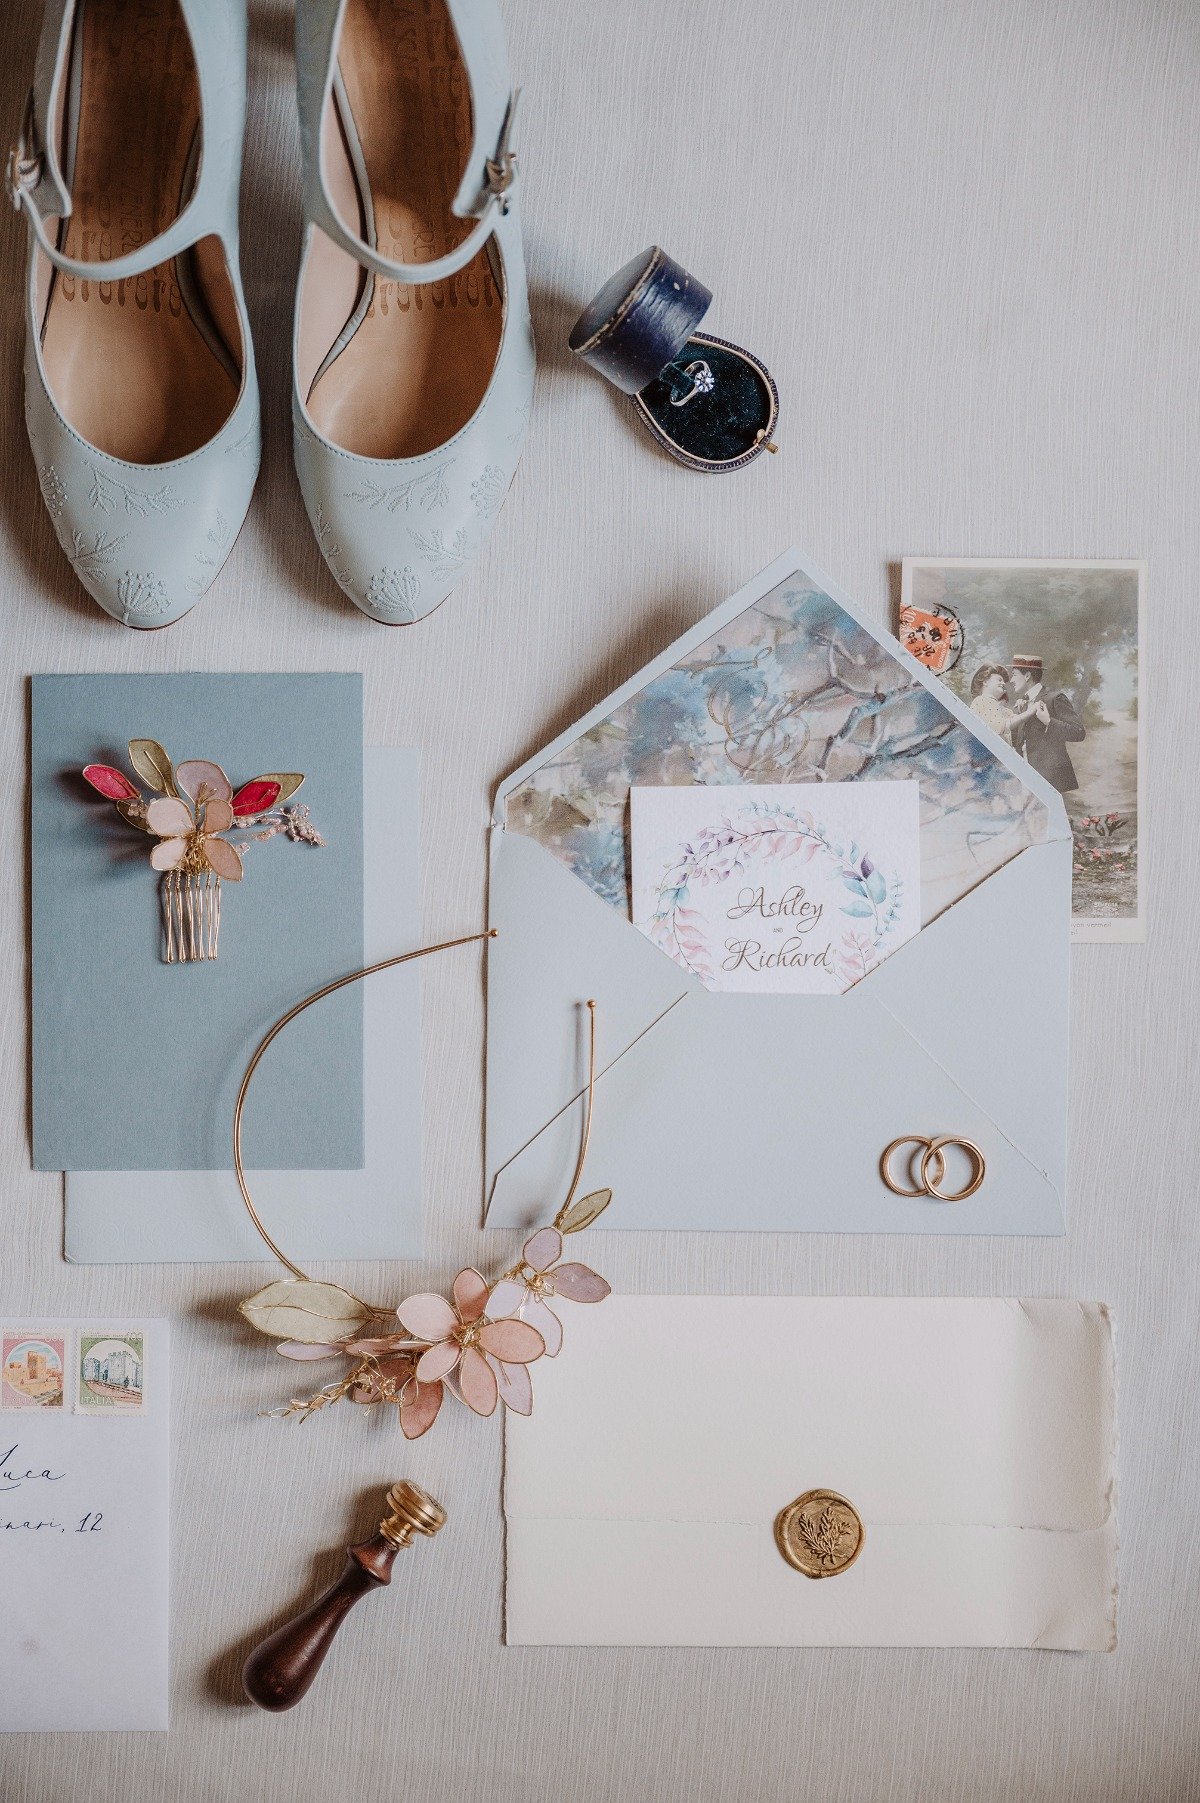 Aerial view of shoes, wedding ring, hairpiece, and invitations